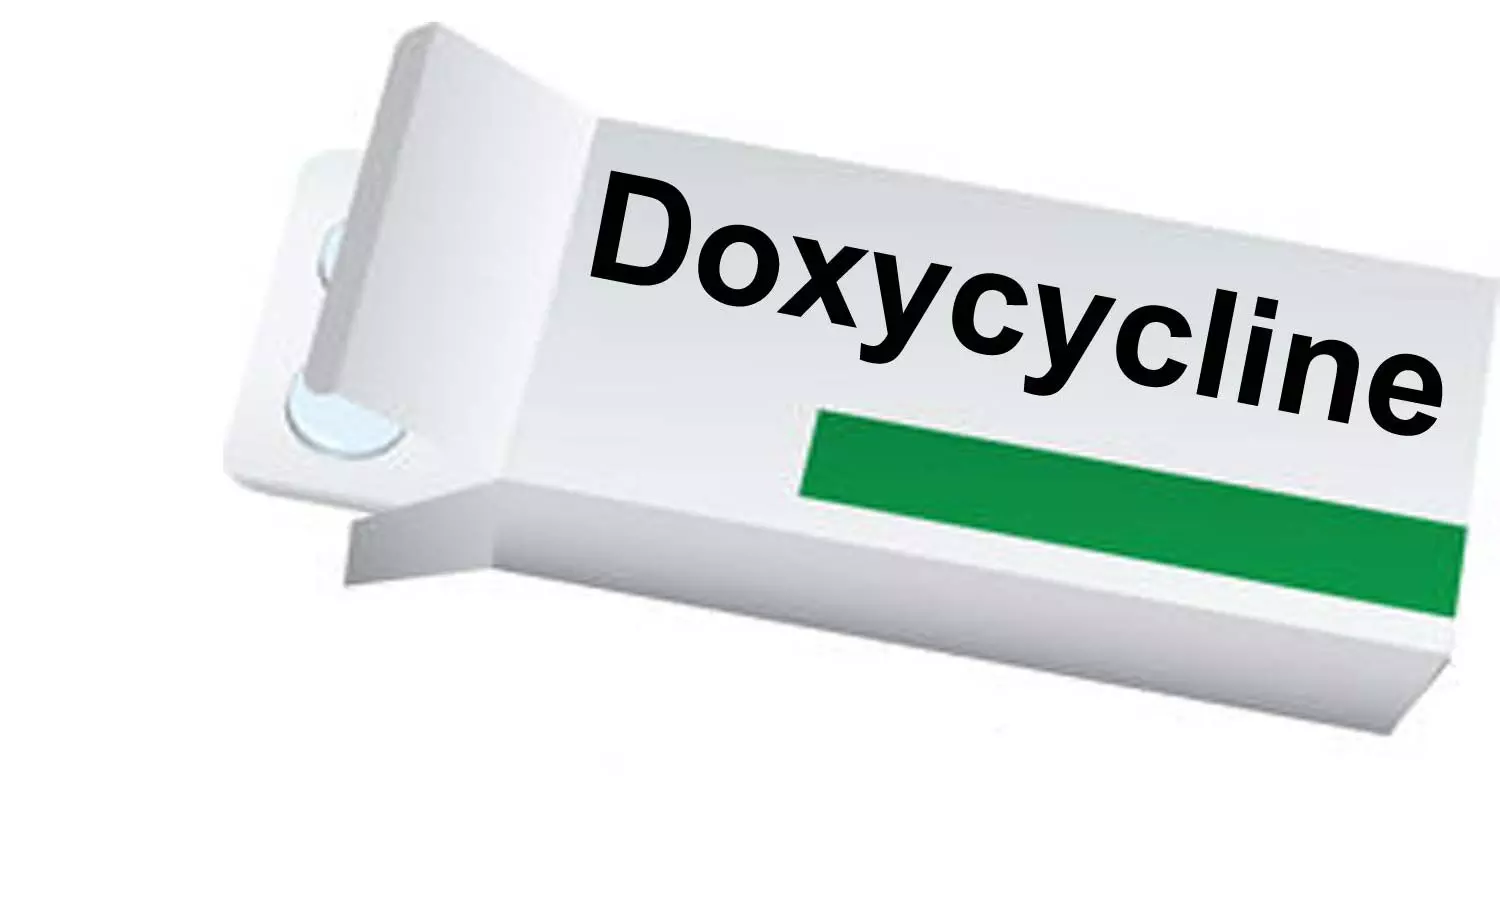 No benefit of Doxycycline to avoid surgery for abdominal aortic aneurysm: JAMA